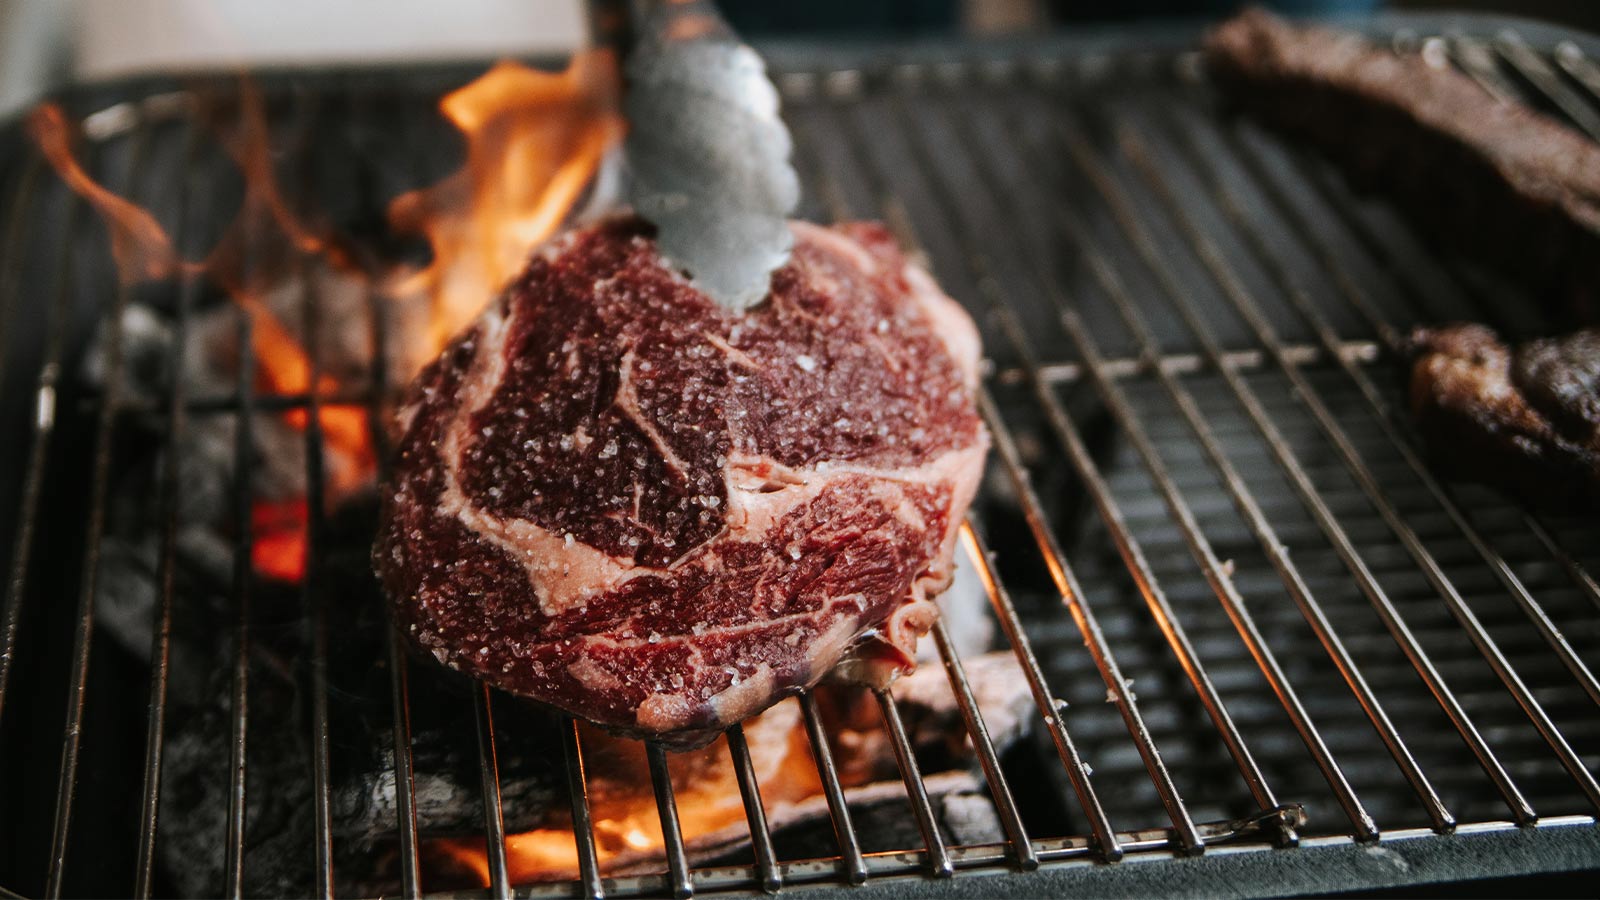 How to Grill Grass Fed Steaks on Gas Grill